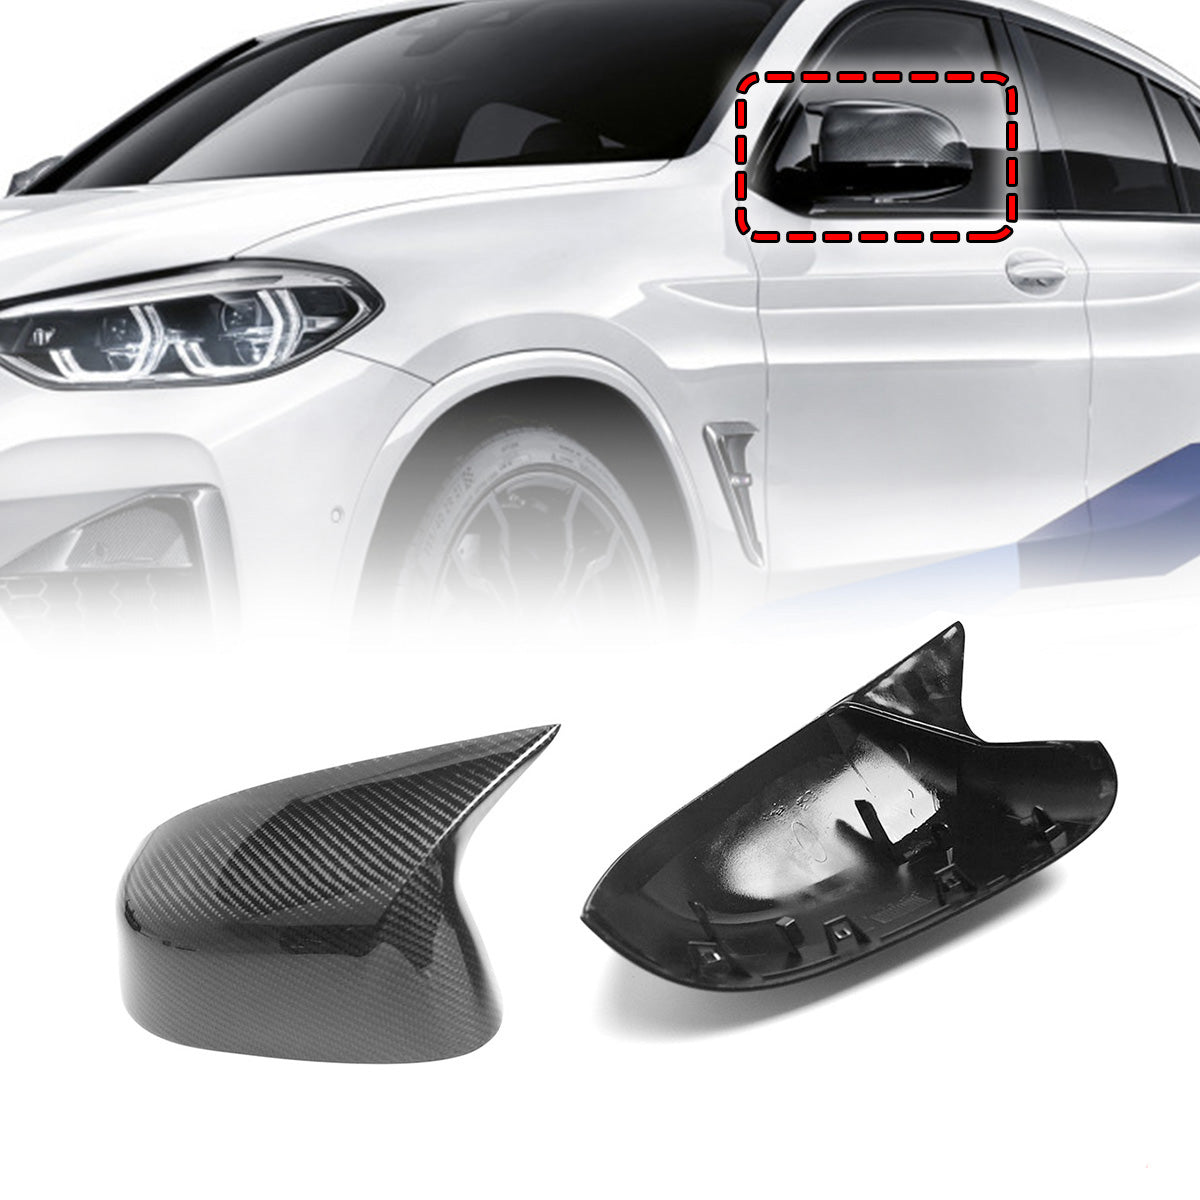 Lavender A Pair Replacement Plastic Gloss Rear Side Car Mirror Cover For BMW X3 - X6 G01 2018 +